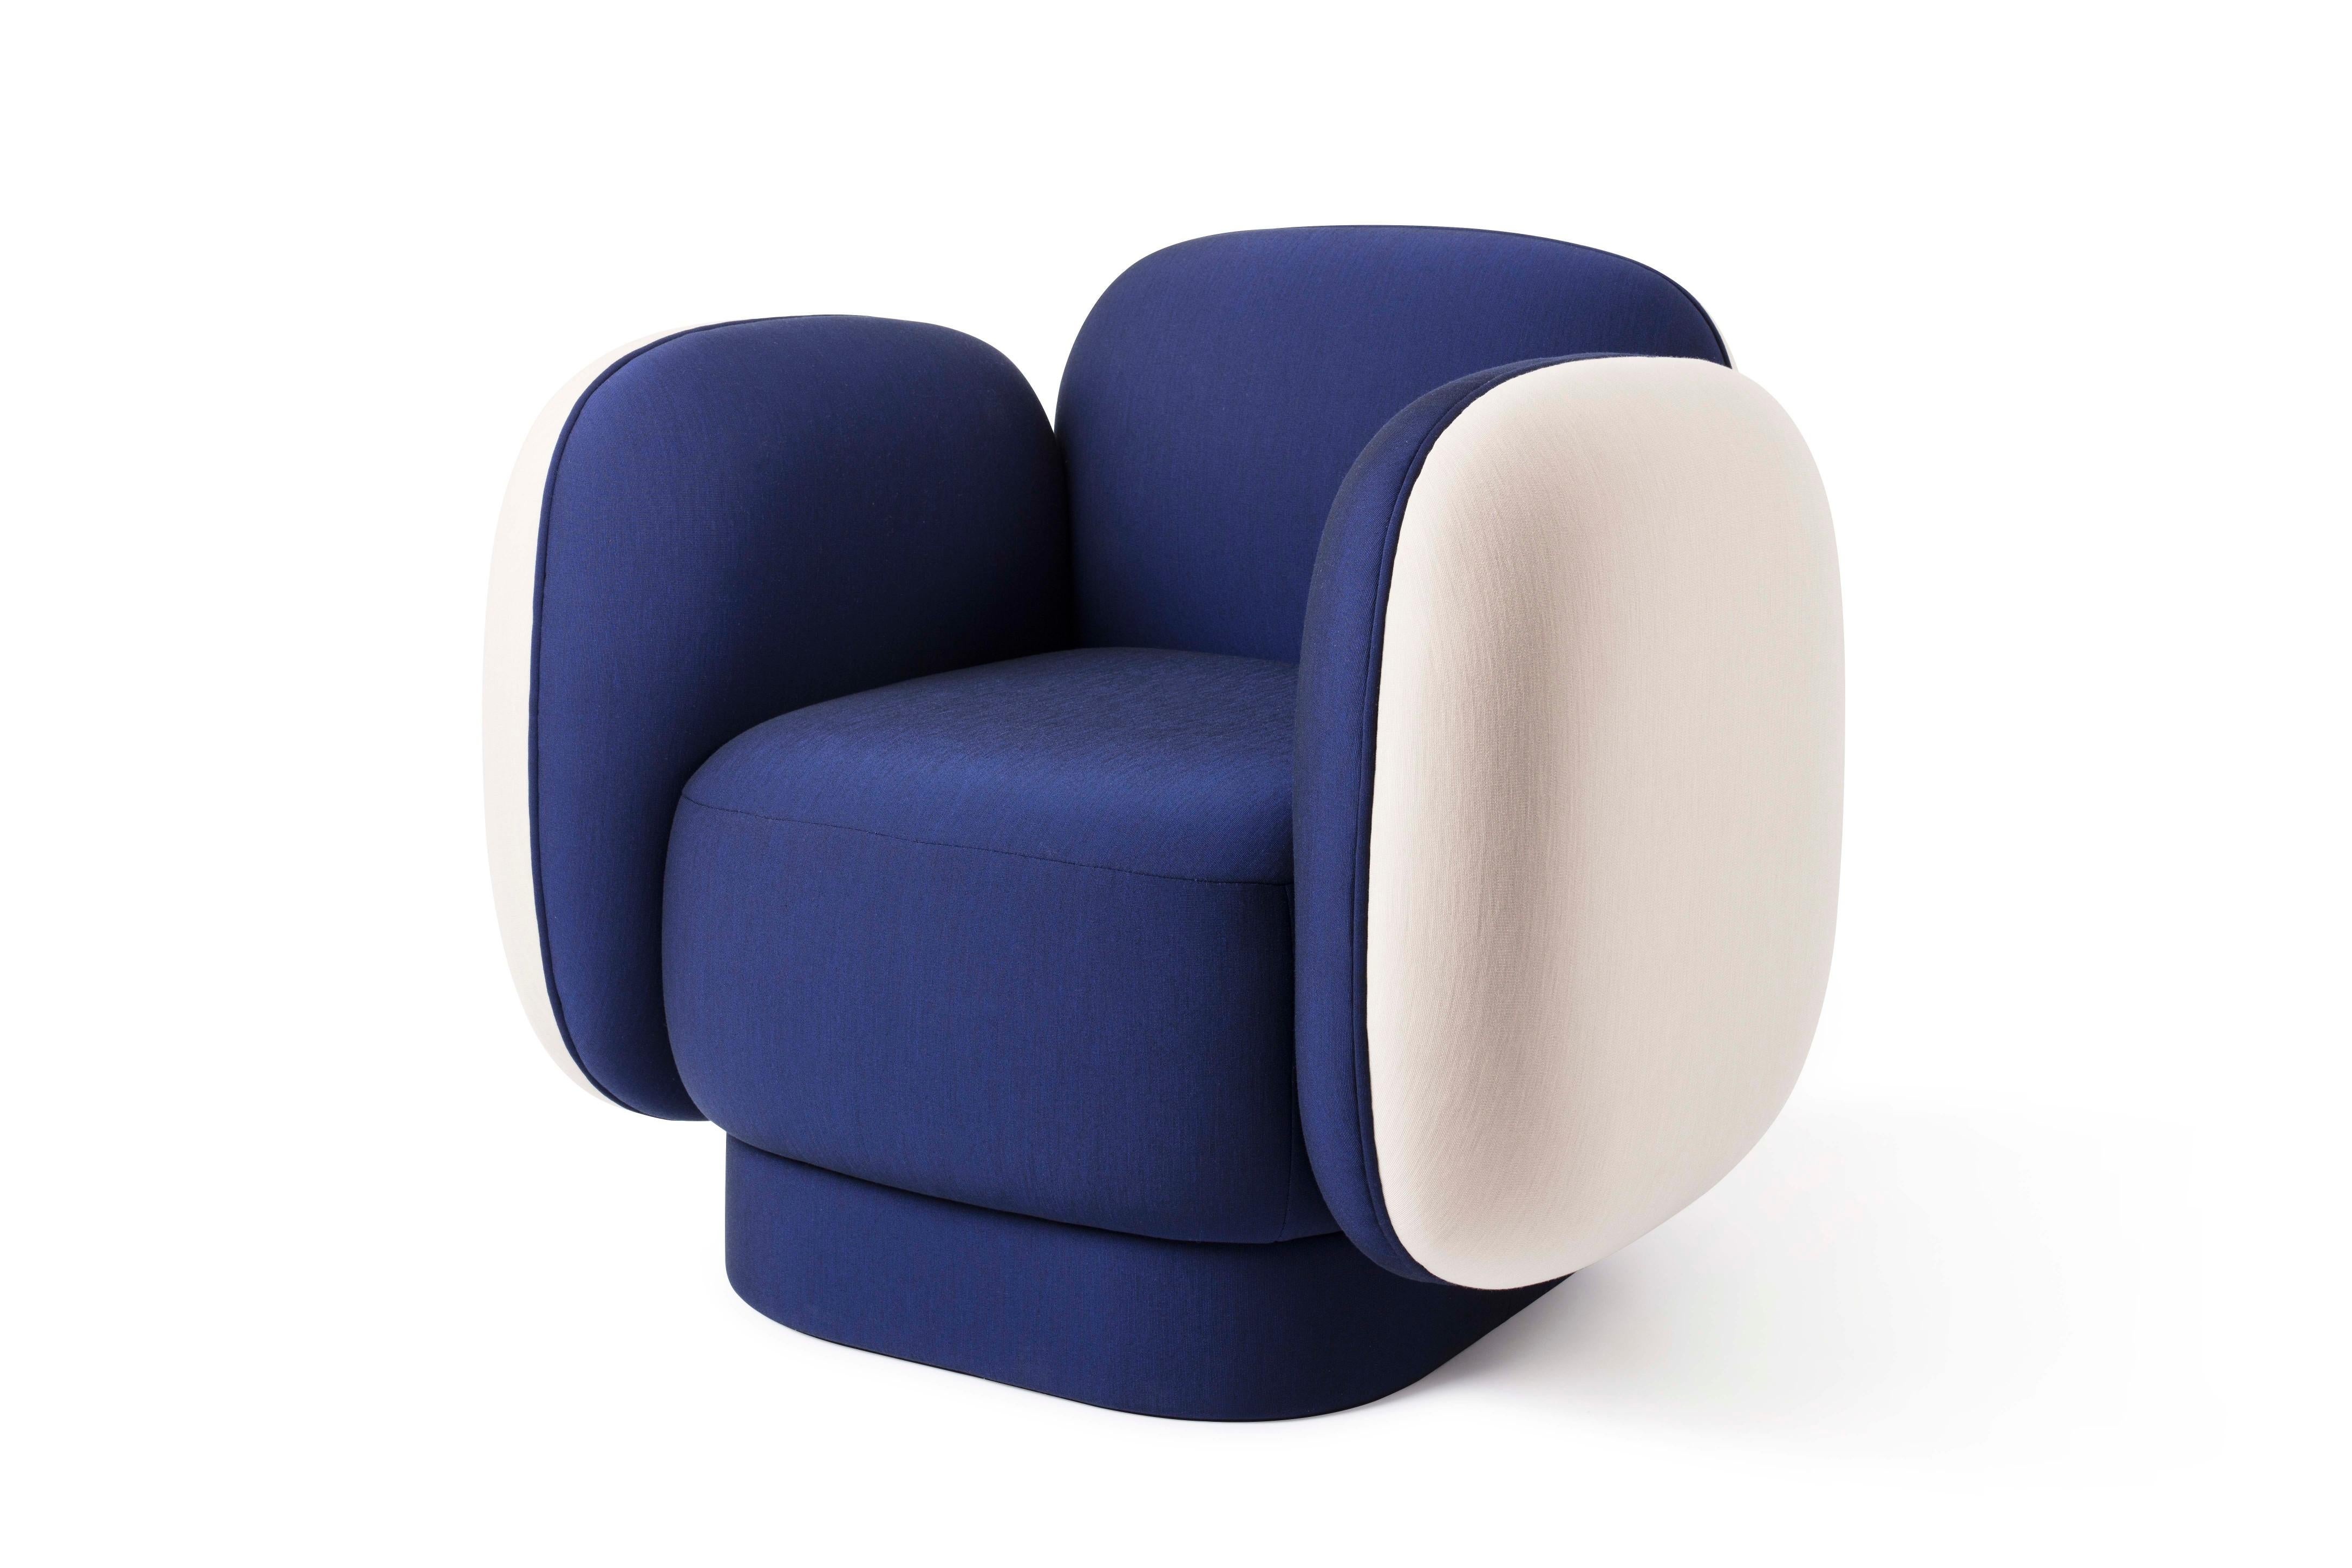 Space Oddity Armchair and Ottoman Designed by Thomas Dariel 1